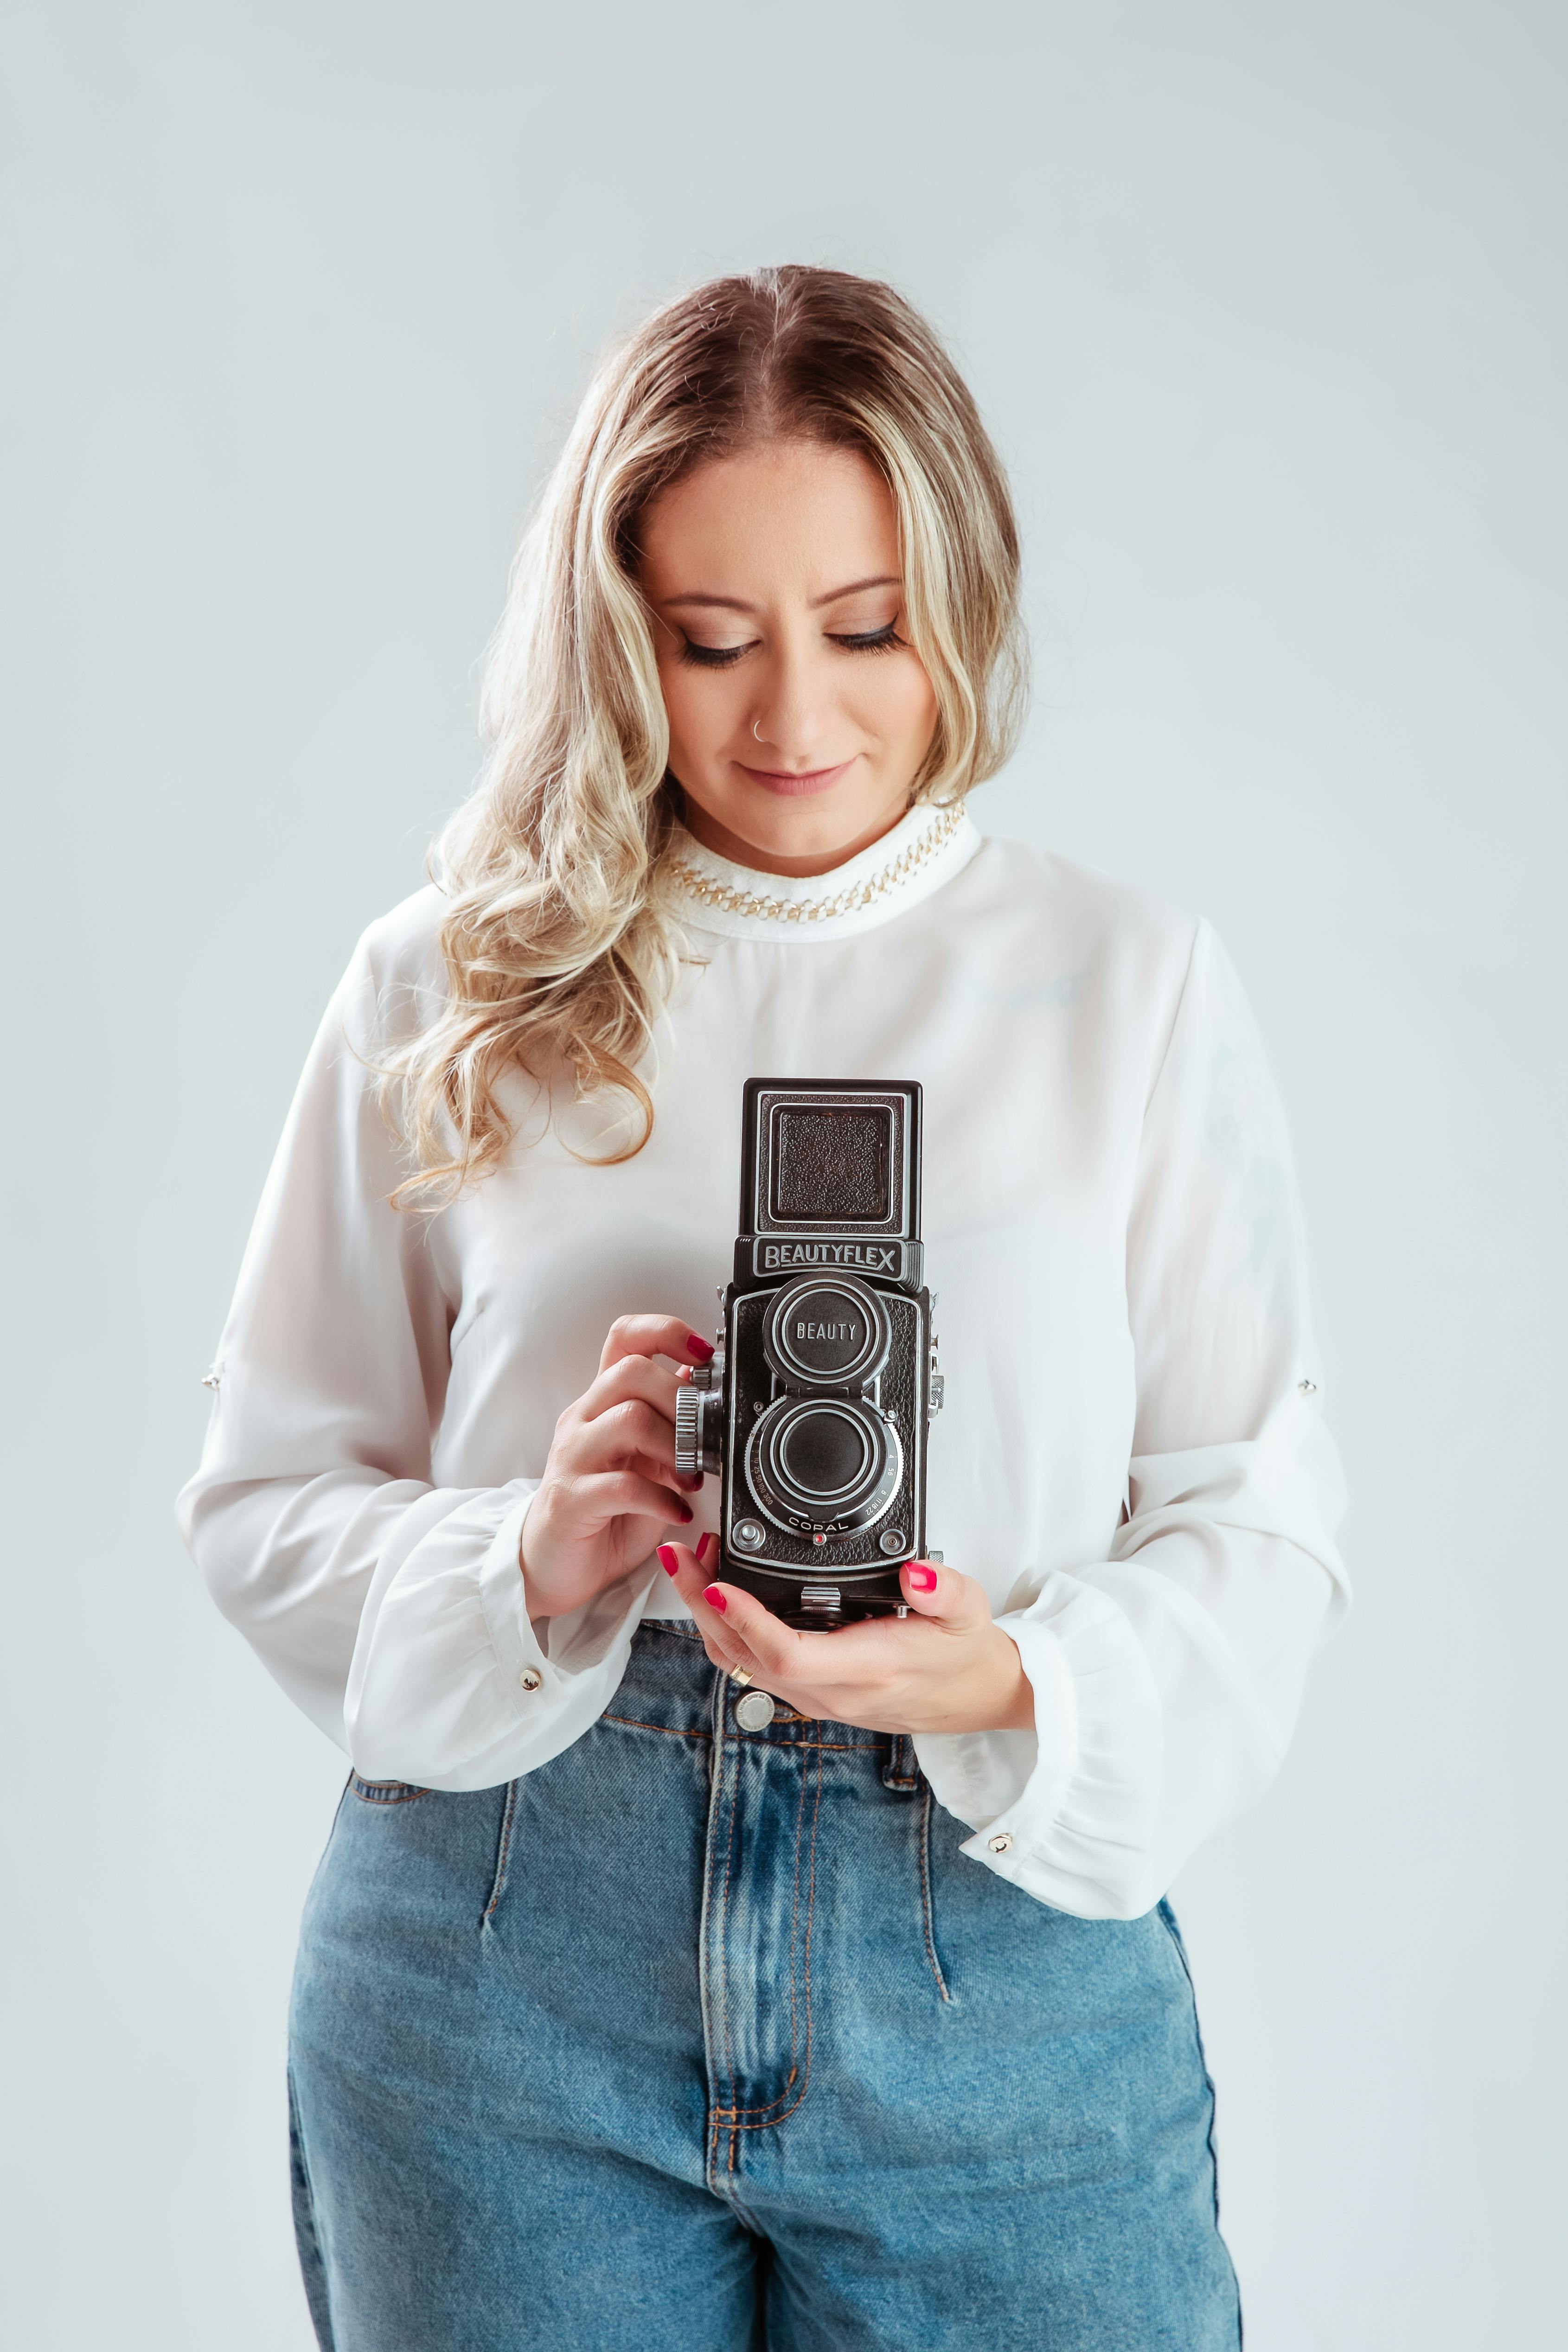 Woman with a camera | Source: Pexels